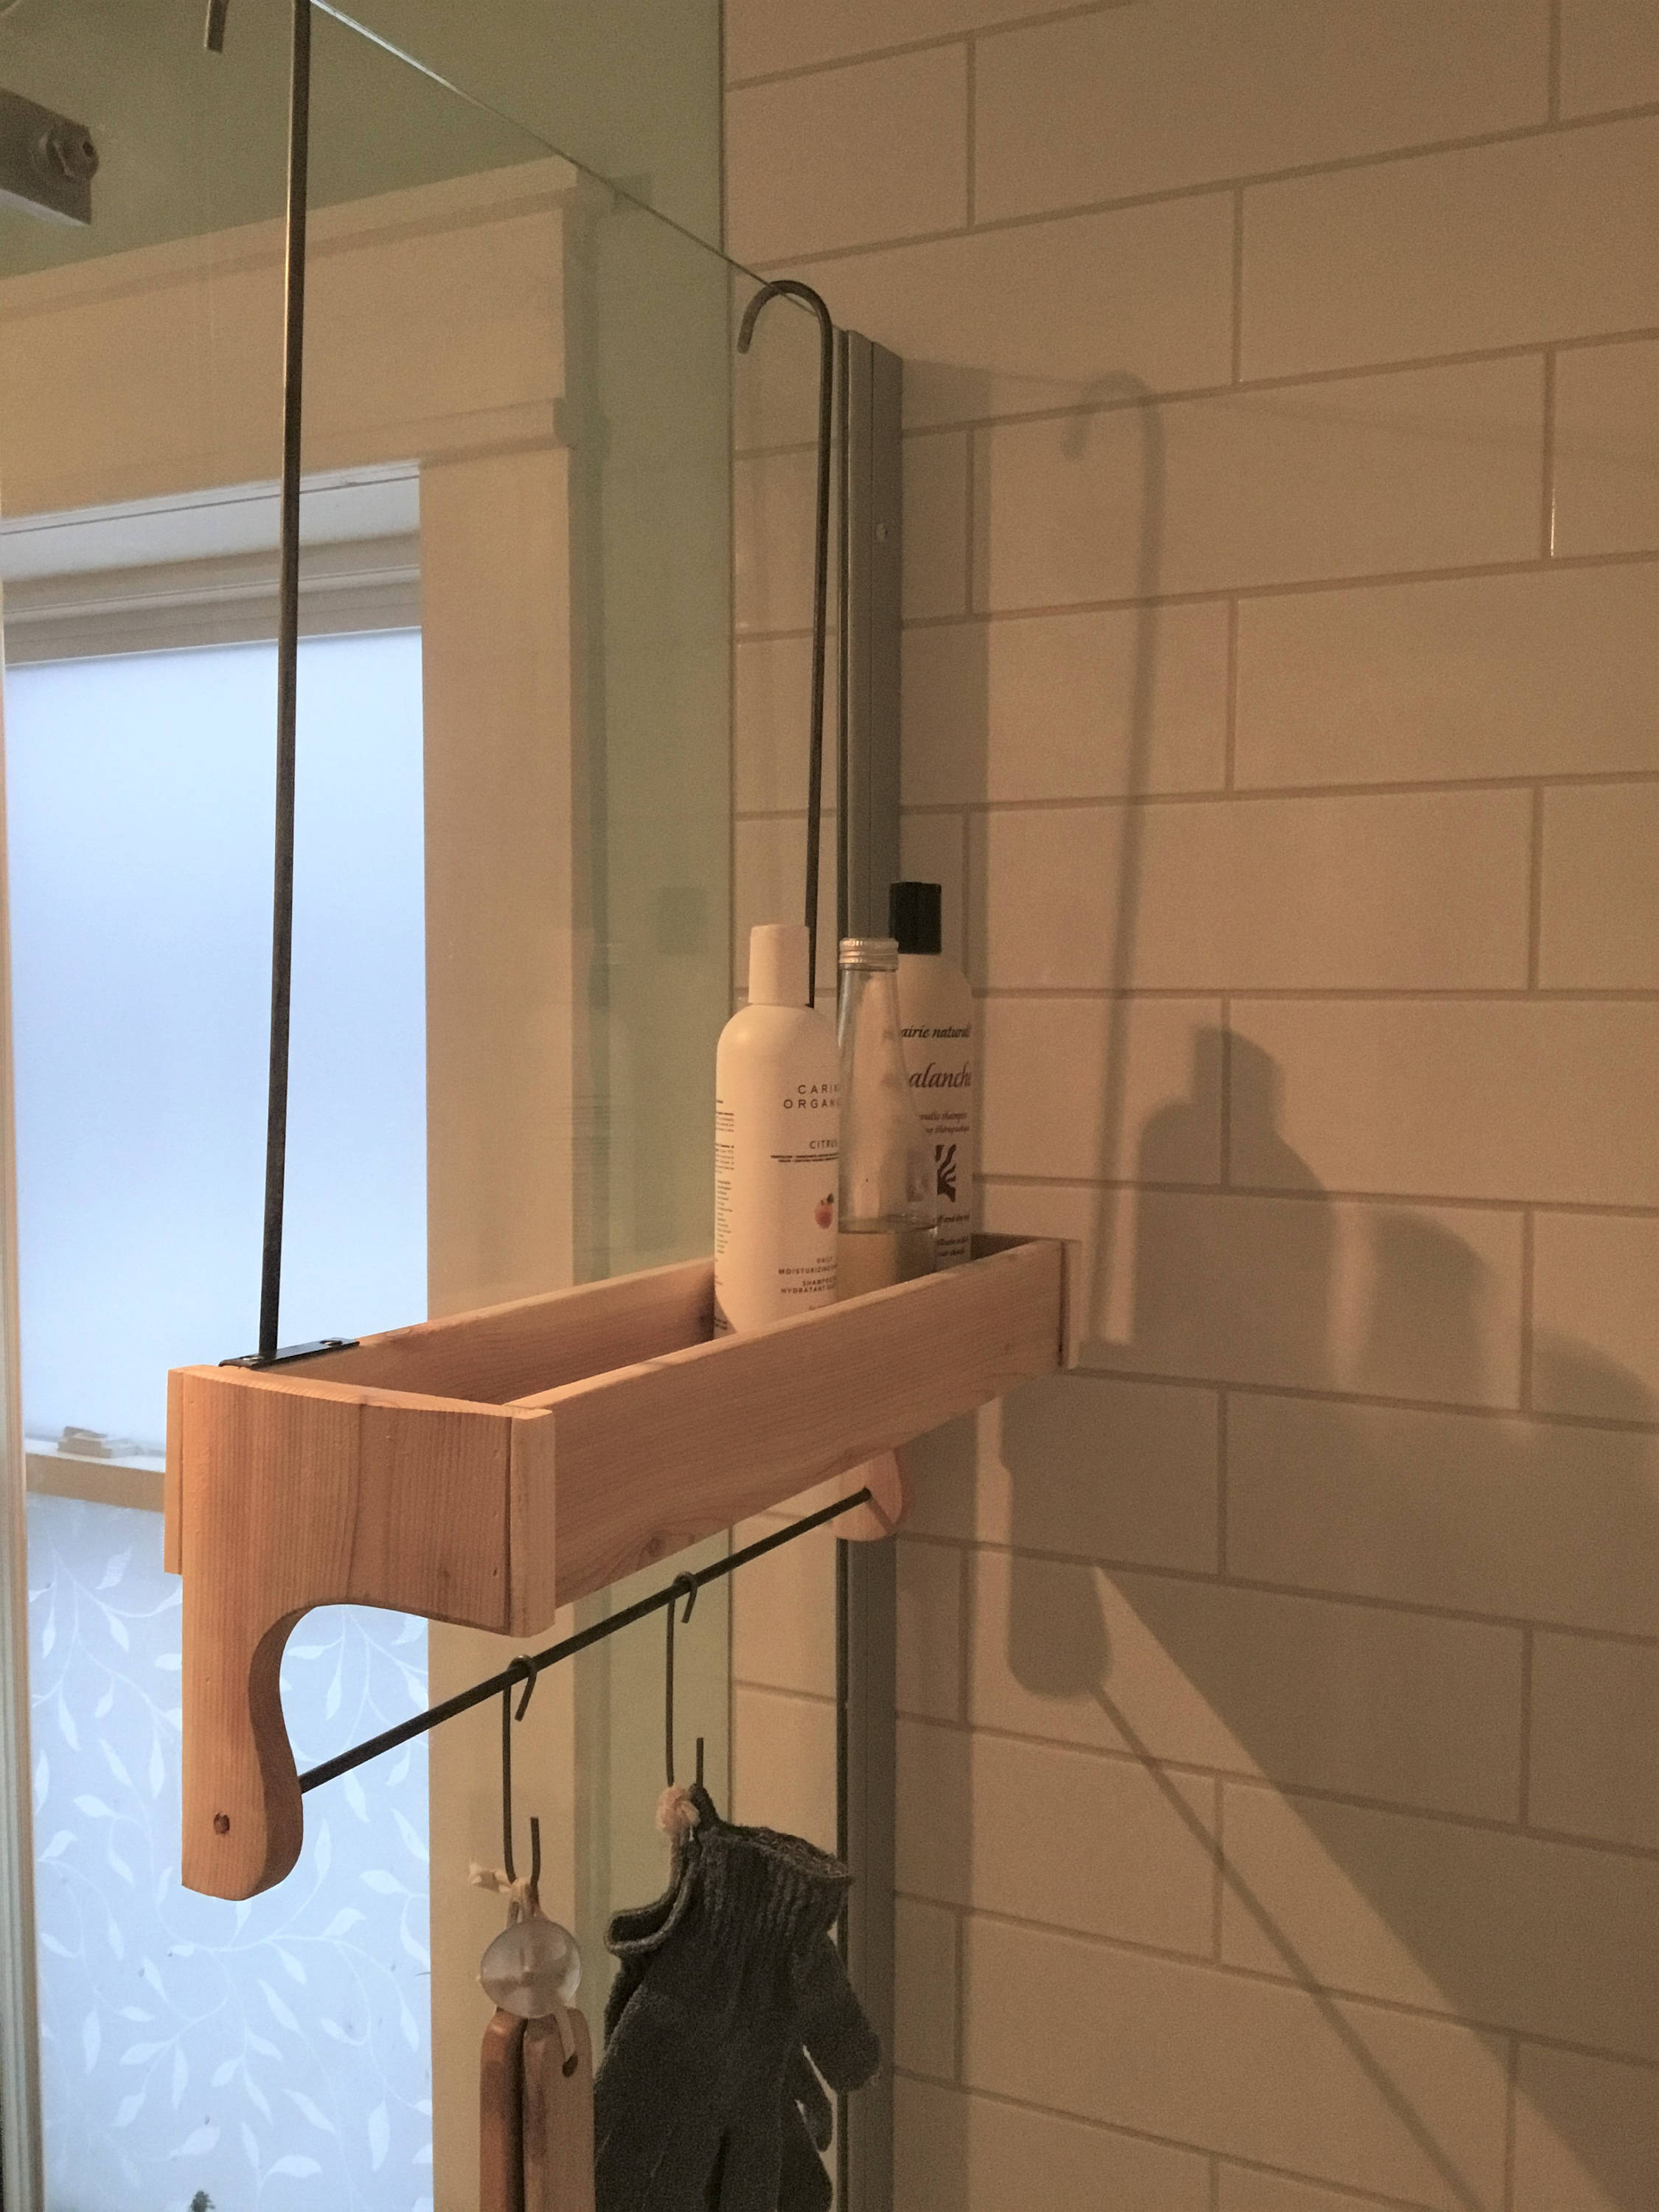 Shower Caddy , Cedar Wood , Double Shelf, Rustic Style Shower Storage ,  Made to Order -  Norway